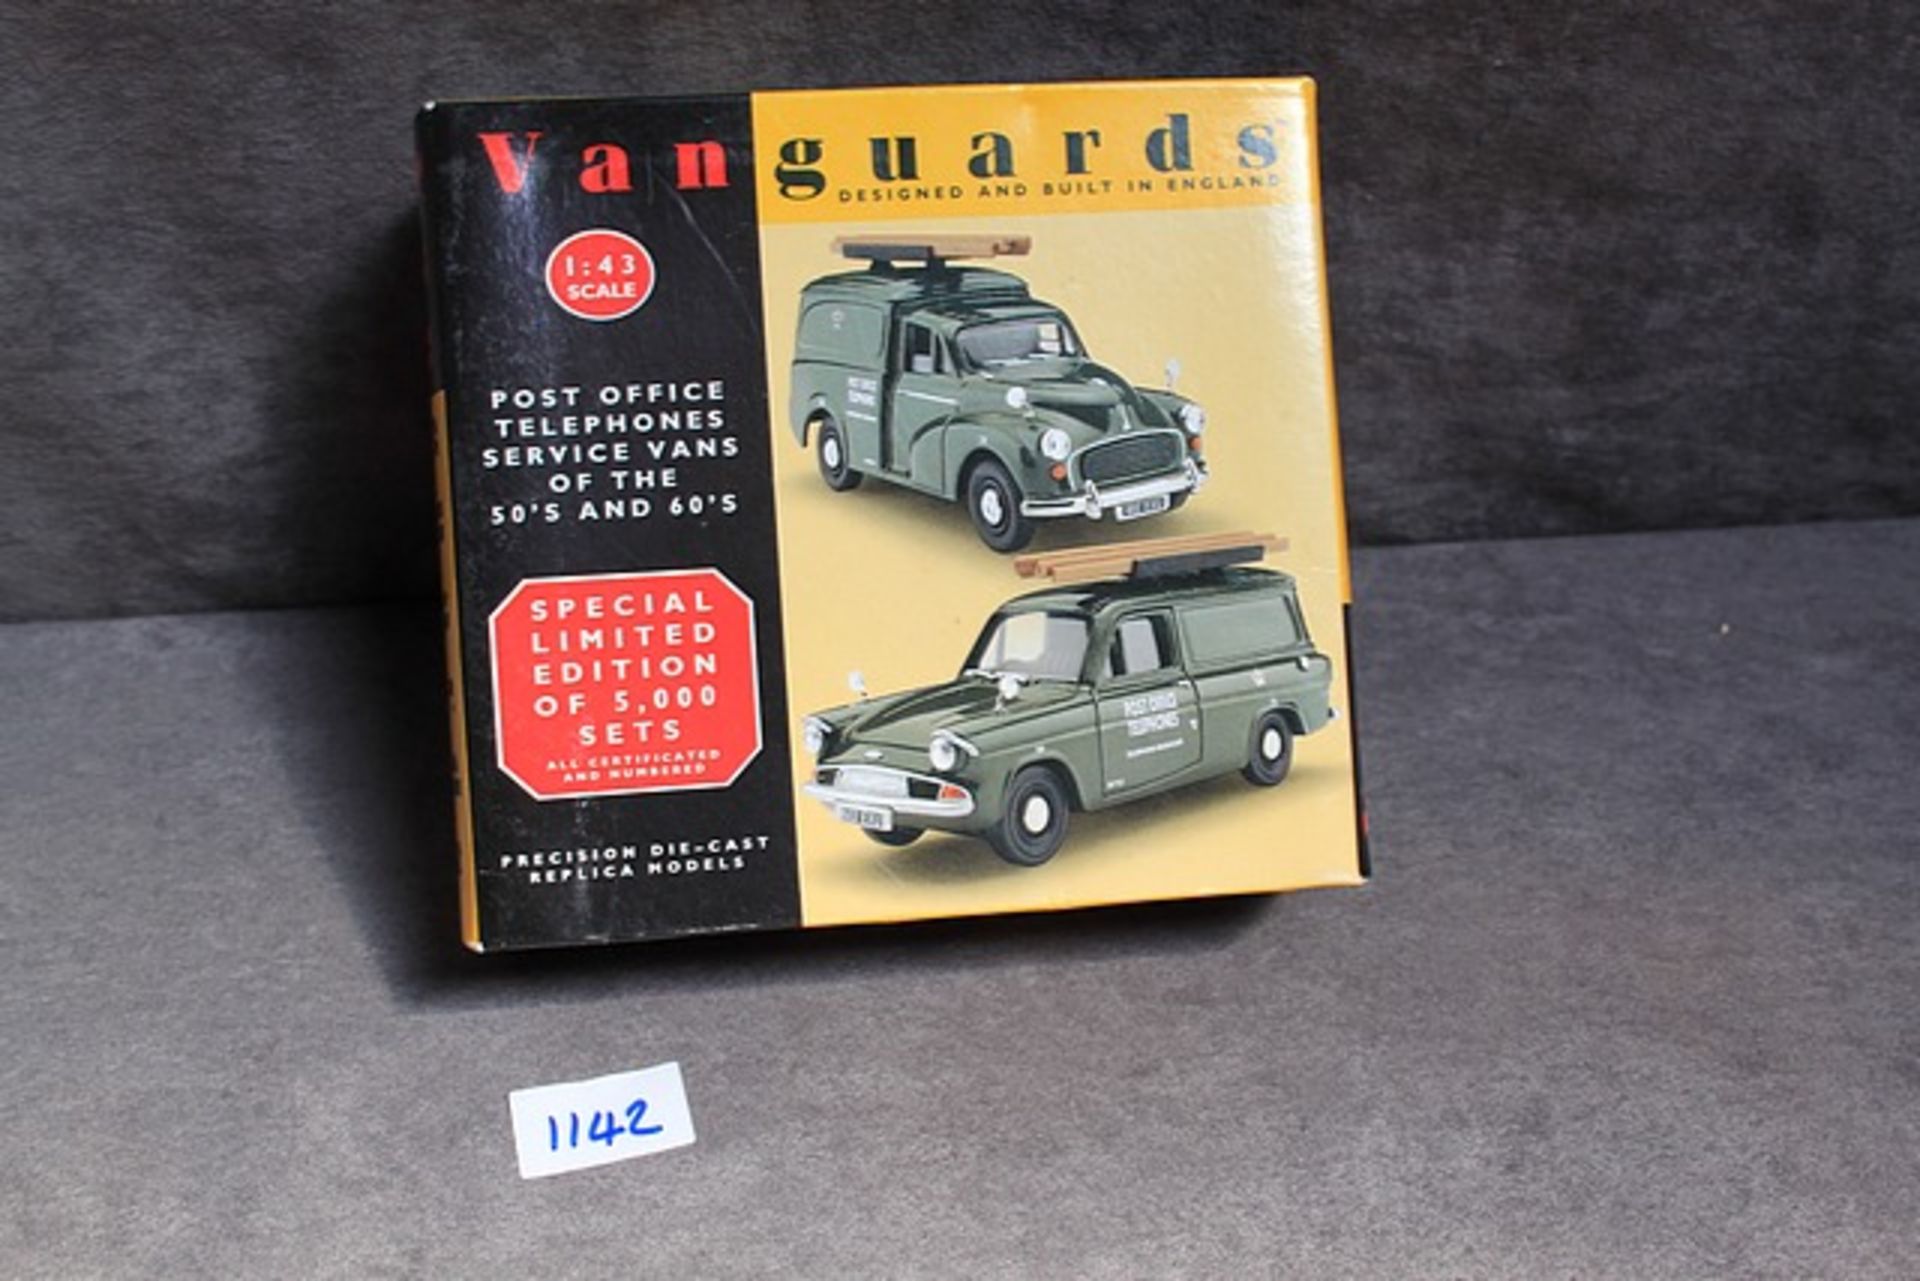 Vanguard diecast #PO 1002 Post Office Telephone Service Vans of the 50's & 60's in box - Image 2 of 2